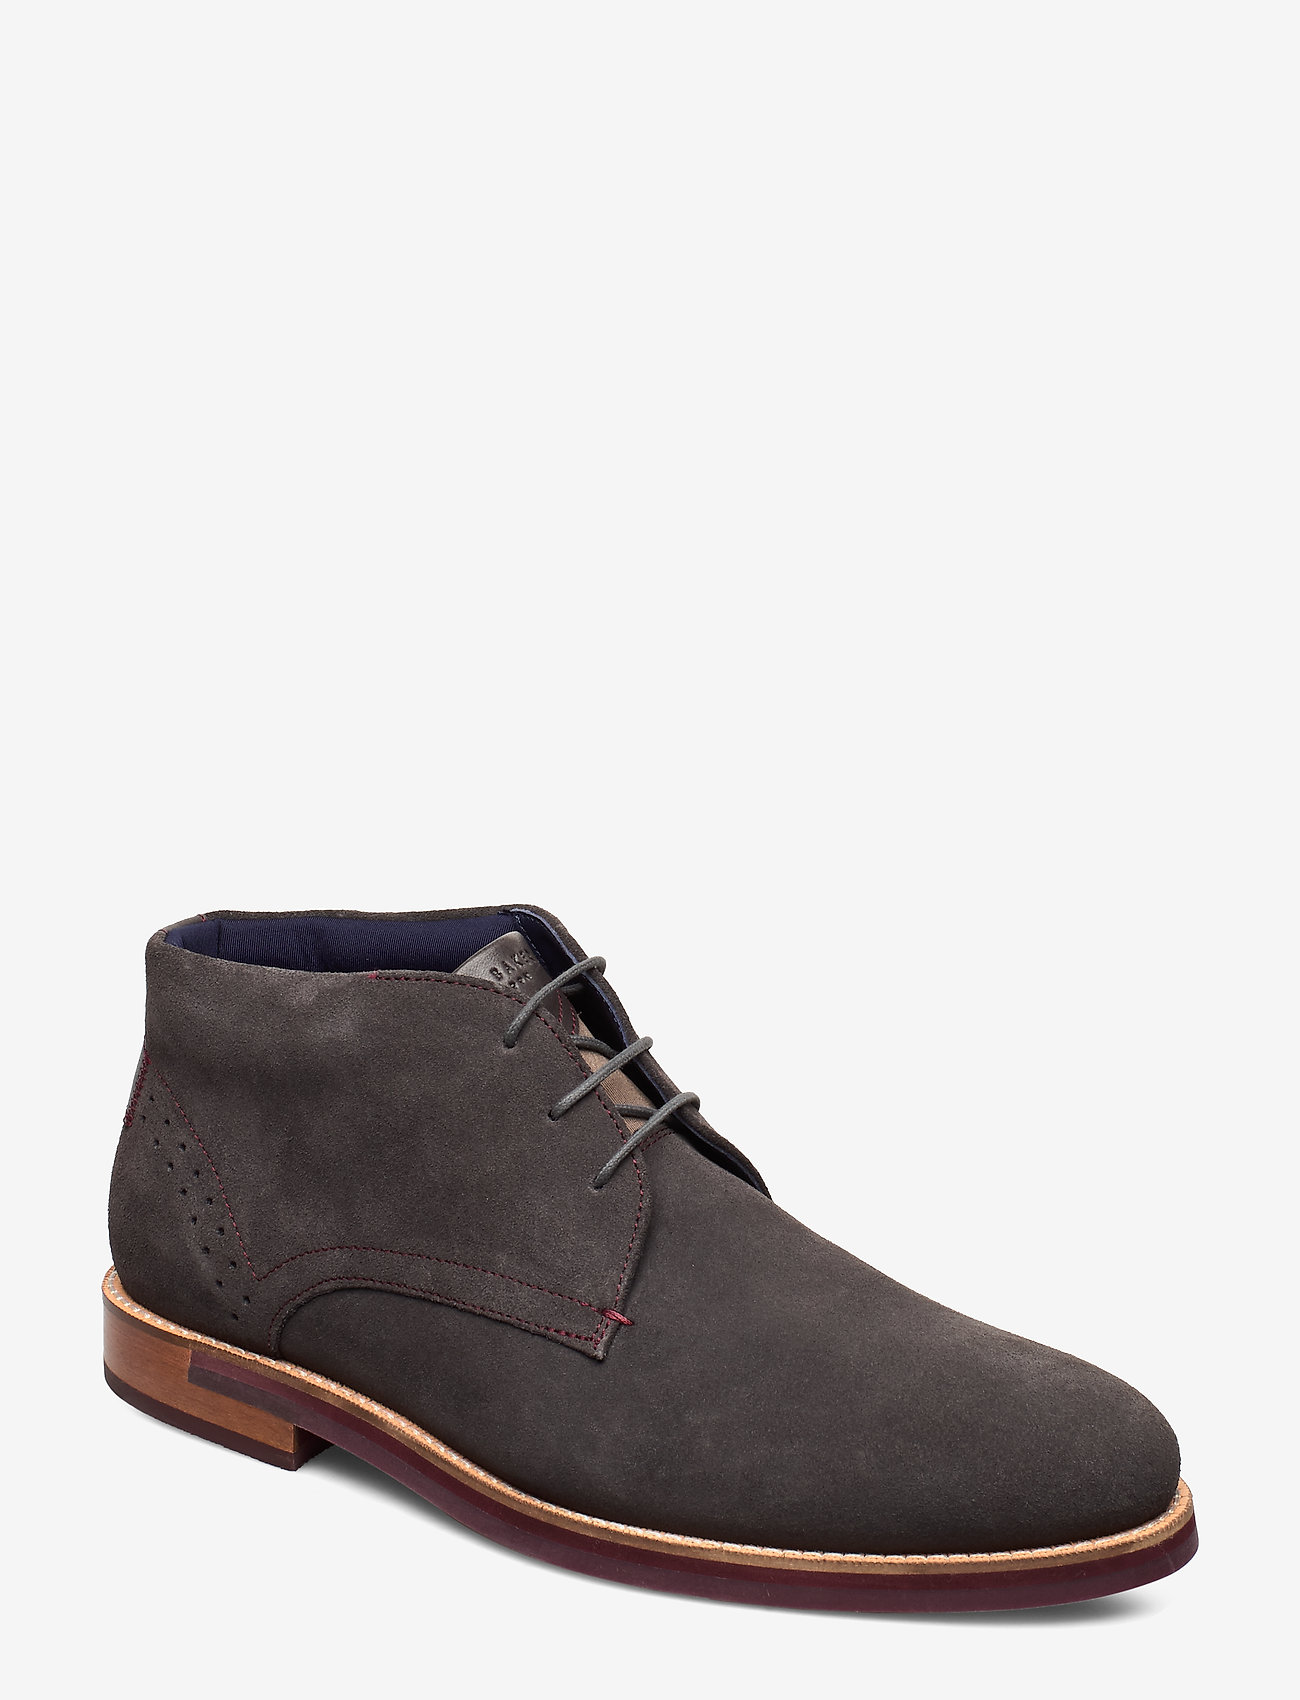 ted baker boots grey